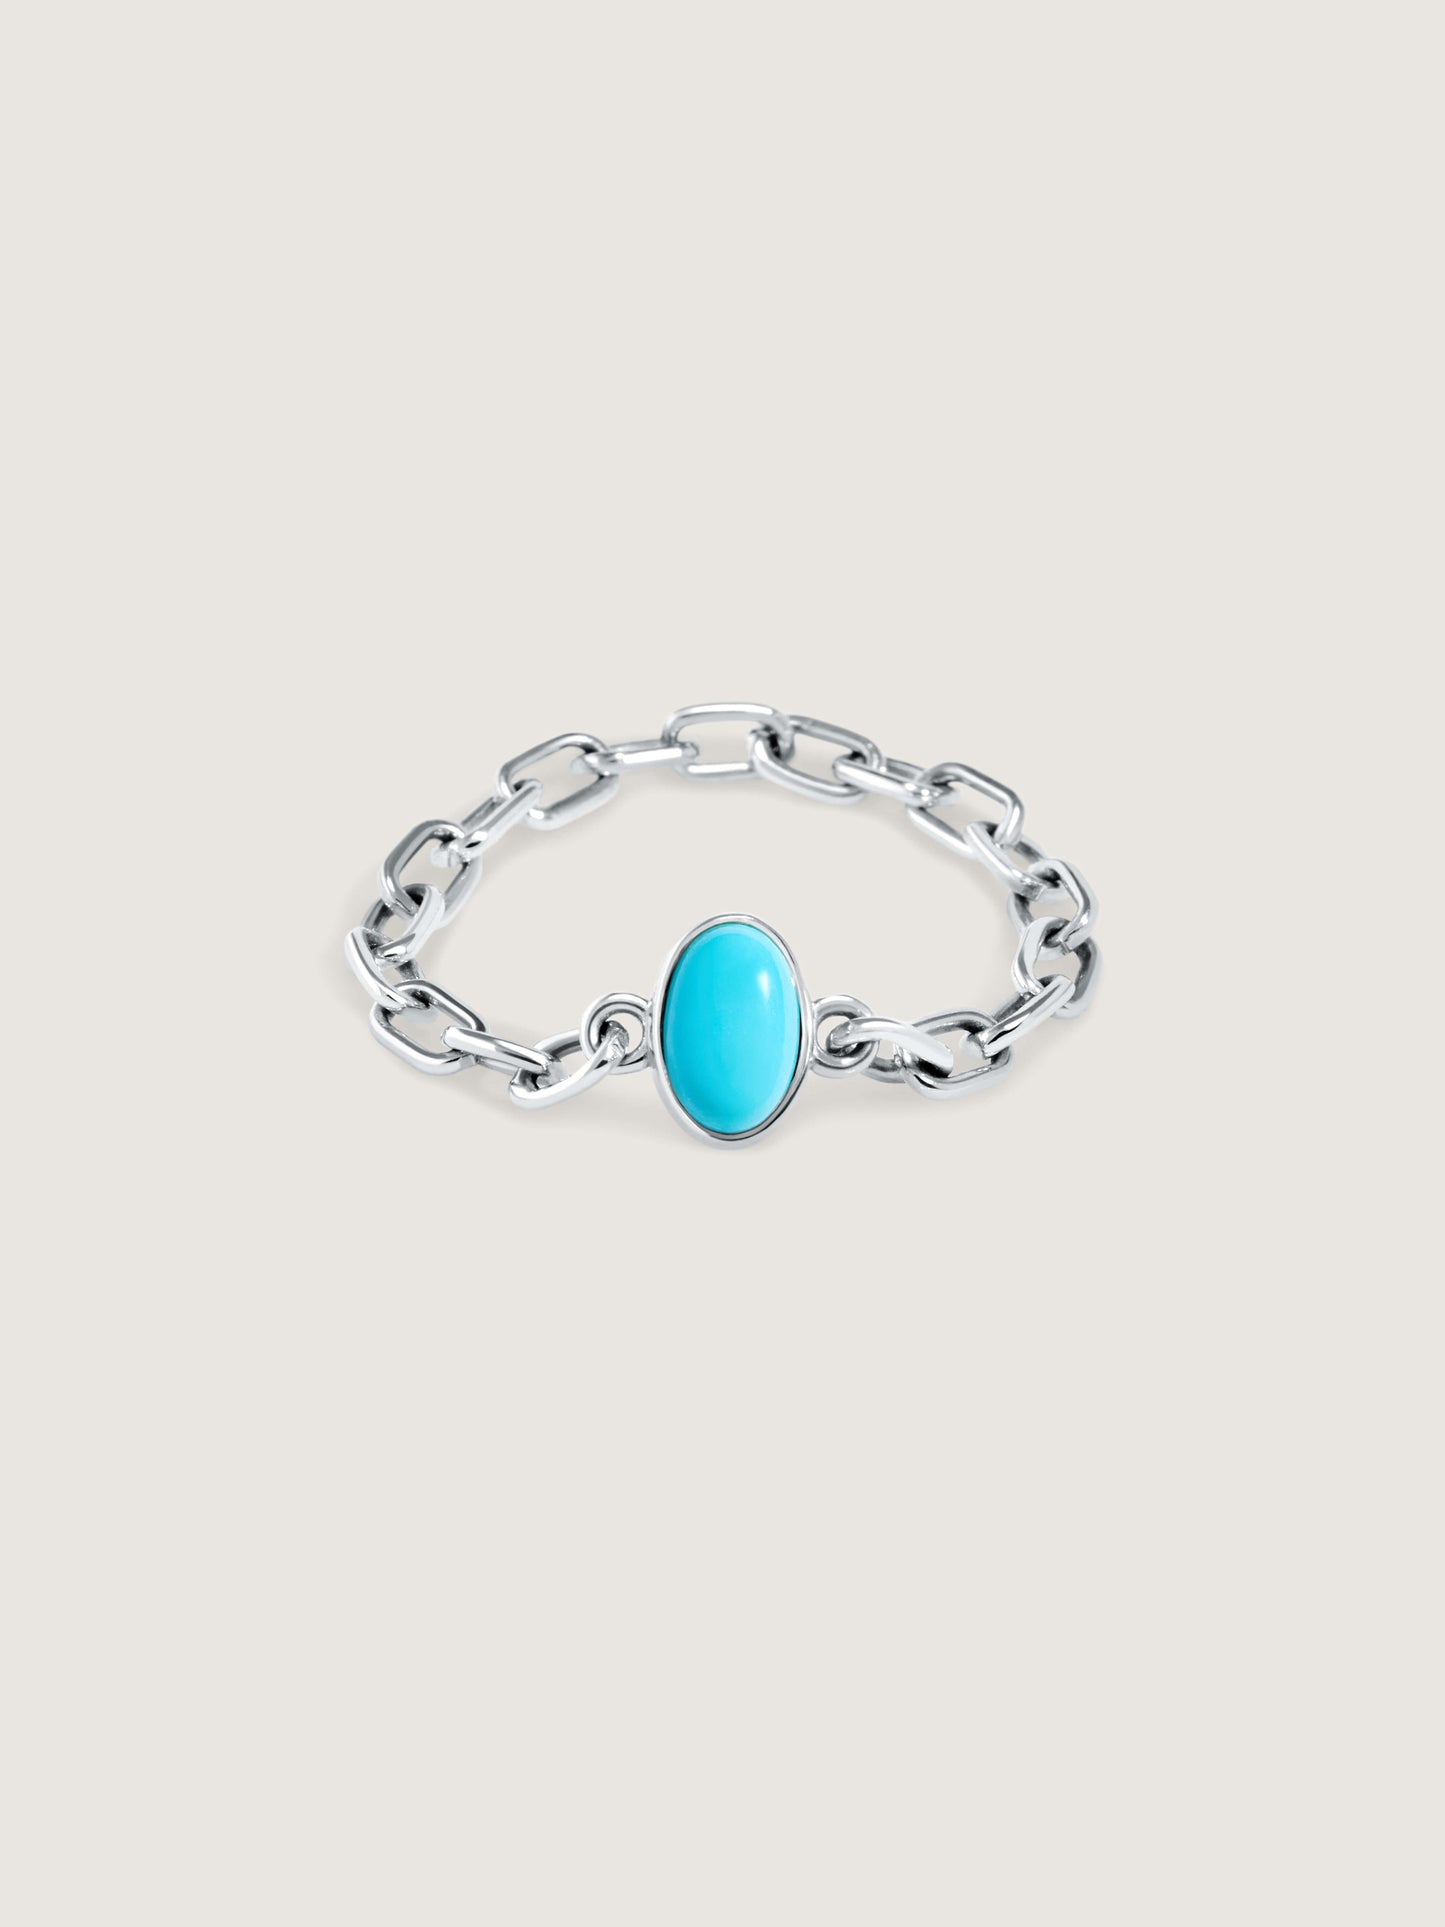 Doublemoss Catena chain ring in 14k gold with turquoise gemstone. Available in 14k Yellow, White, & Rose Gold.